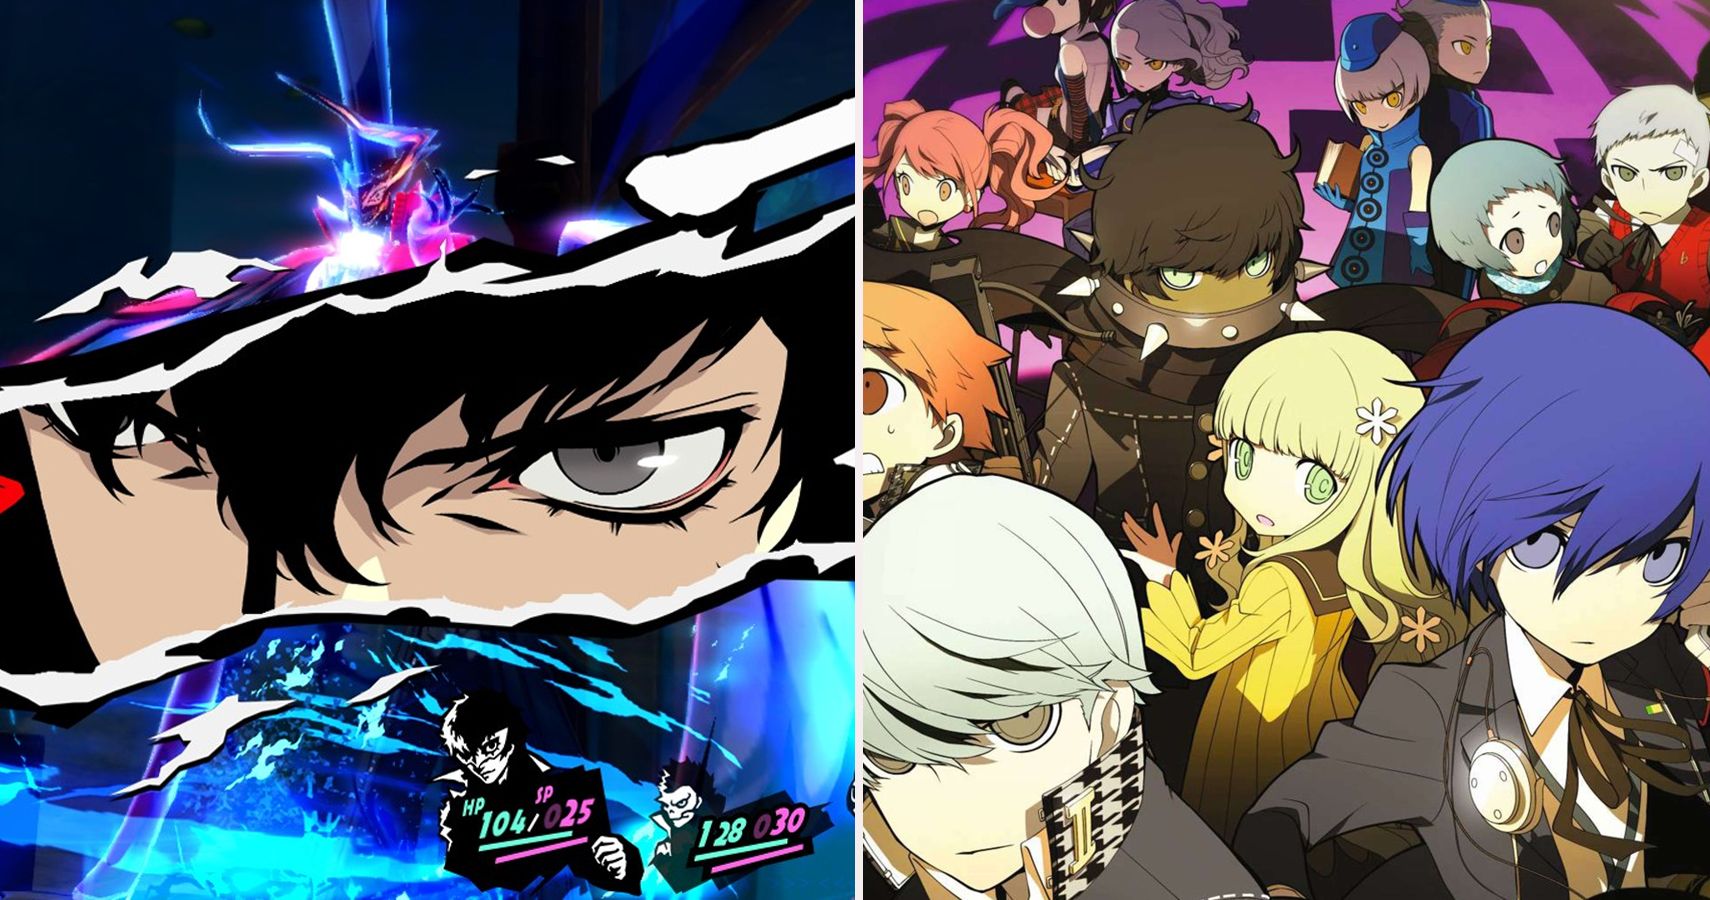 10 Best Persona Games, Ranked By Metacritic